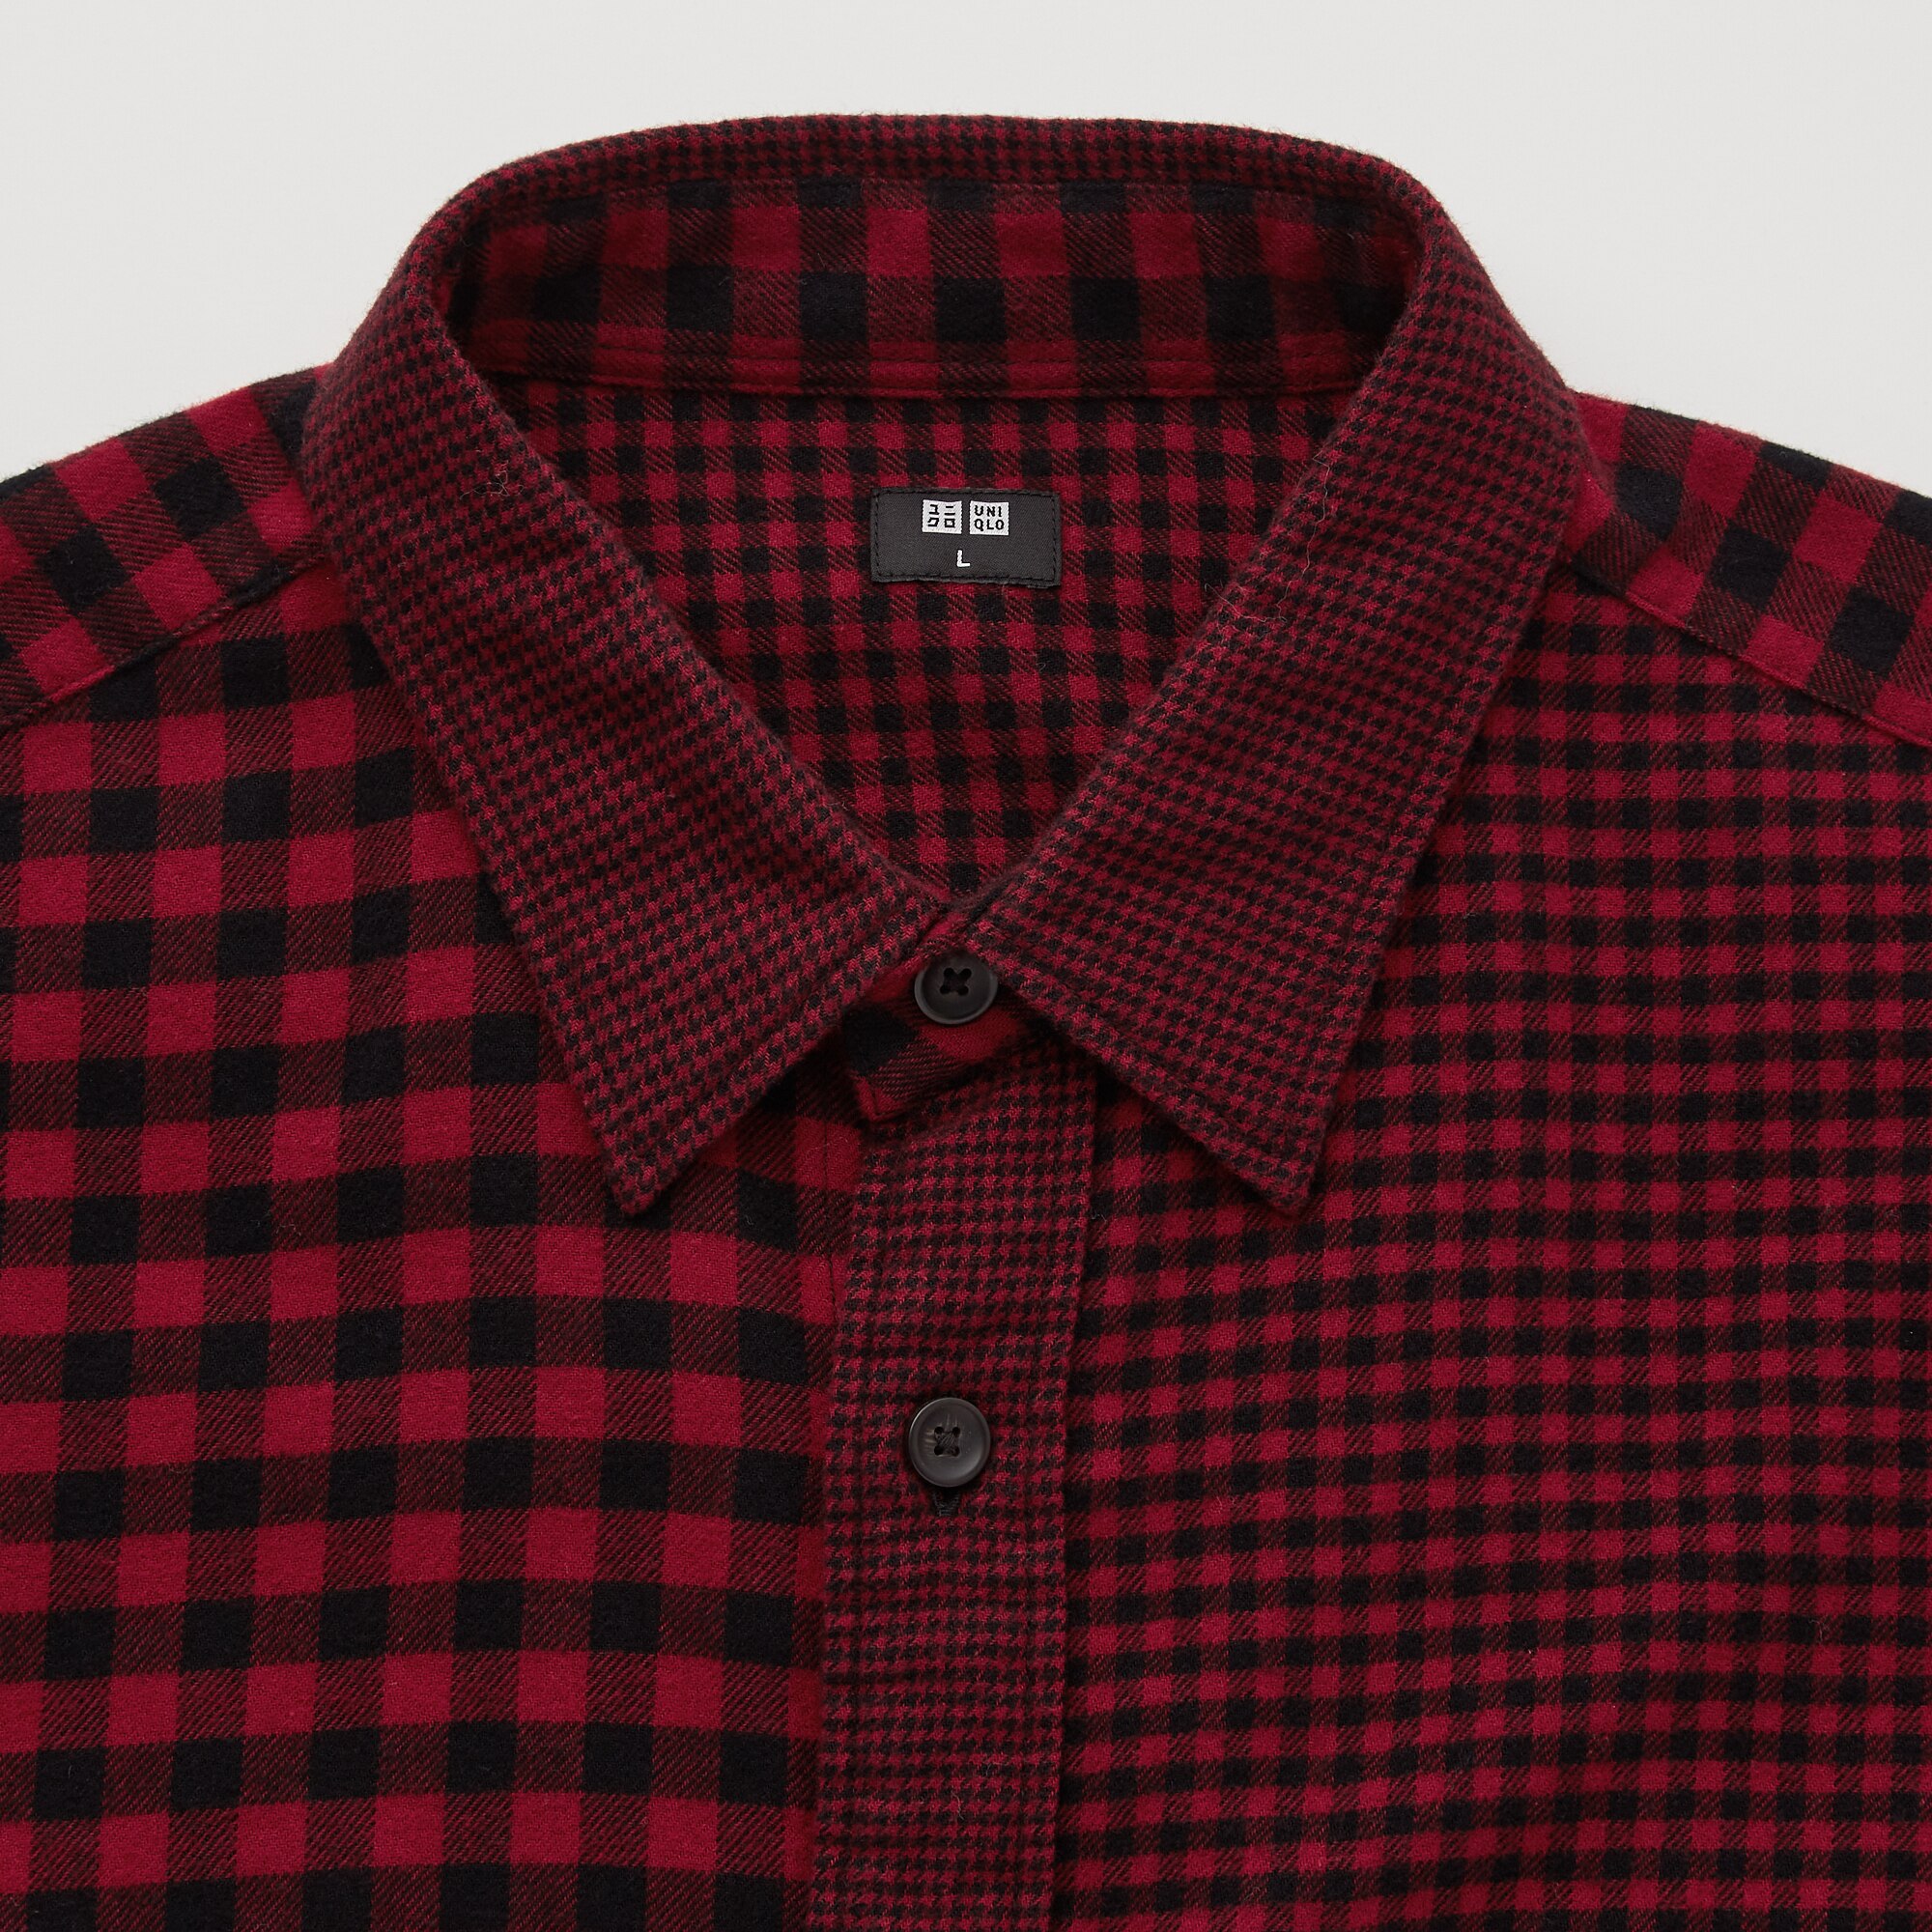 Uniqlo Flannel Shirt Check Plaid Long Sleeve Button Up Size M  eBay